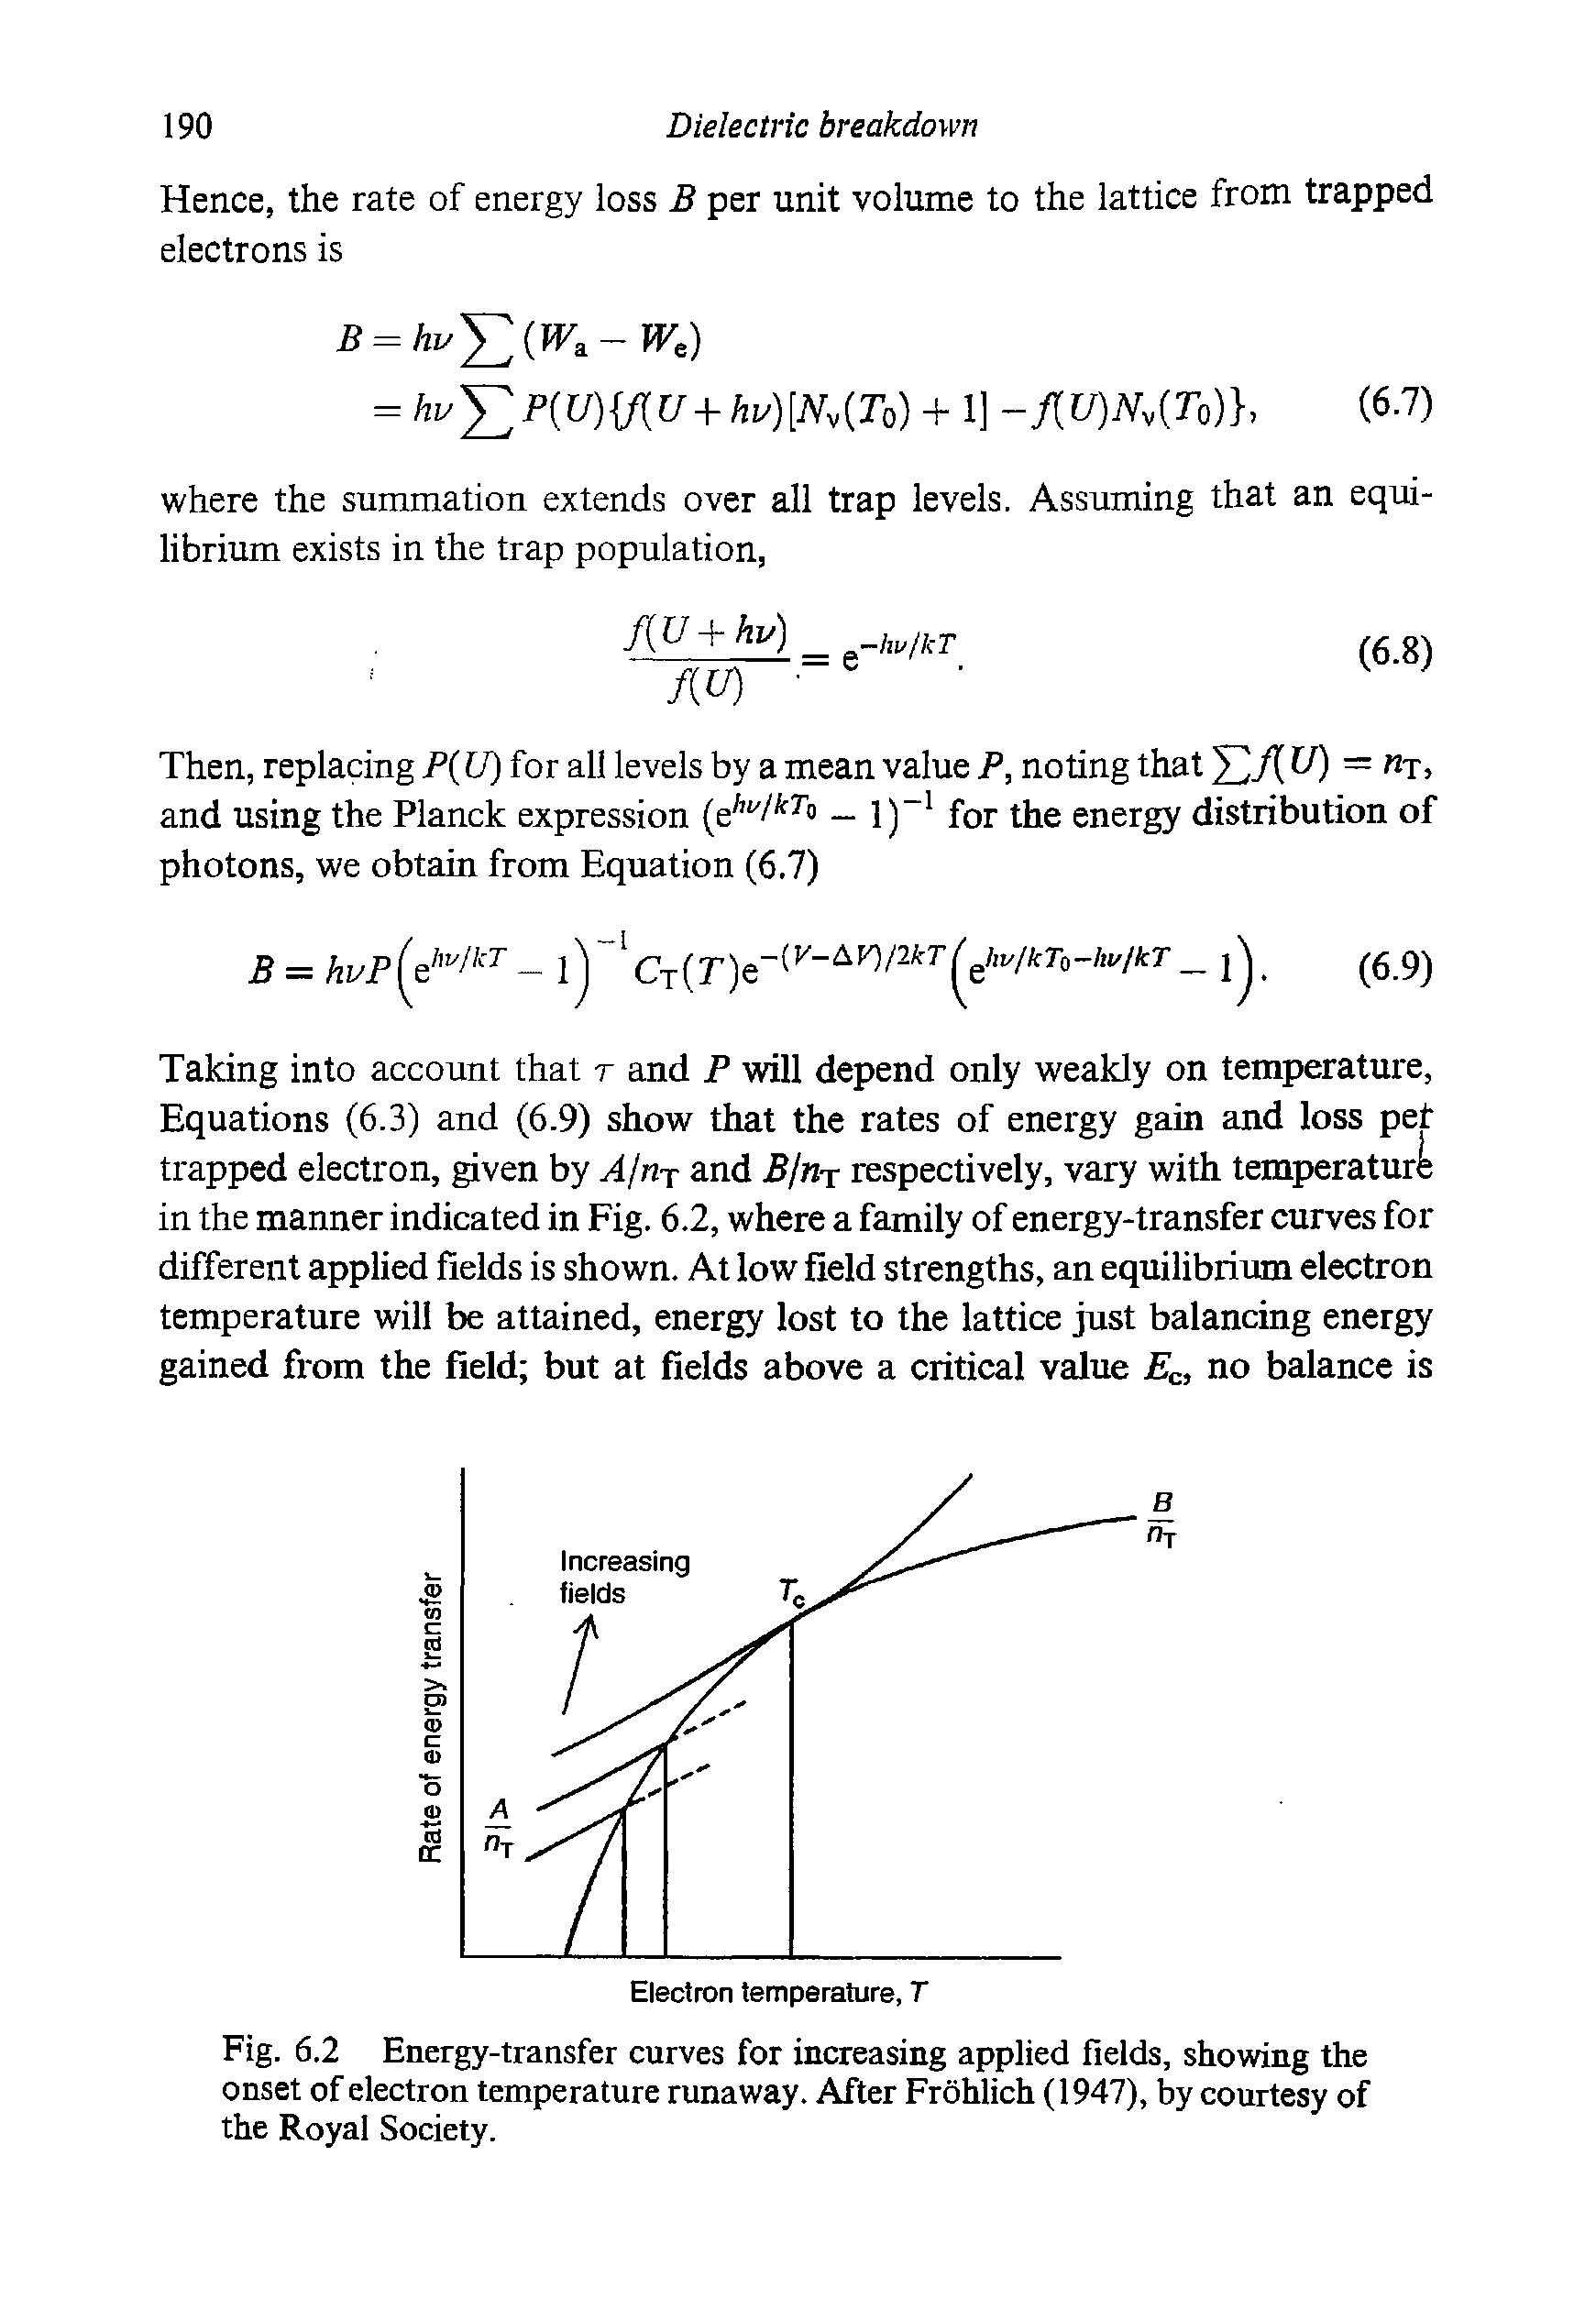 Fig. 6.2 Energy-transfer curves for increasing applied fields, showing the onset of electron temperature runaway. After Frohlich (1947), by courtesy of the Royal Society.